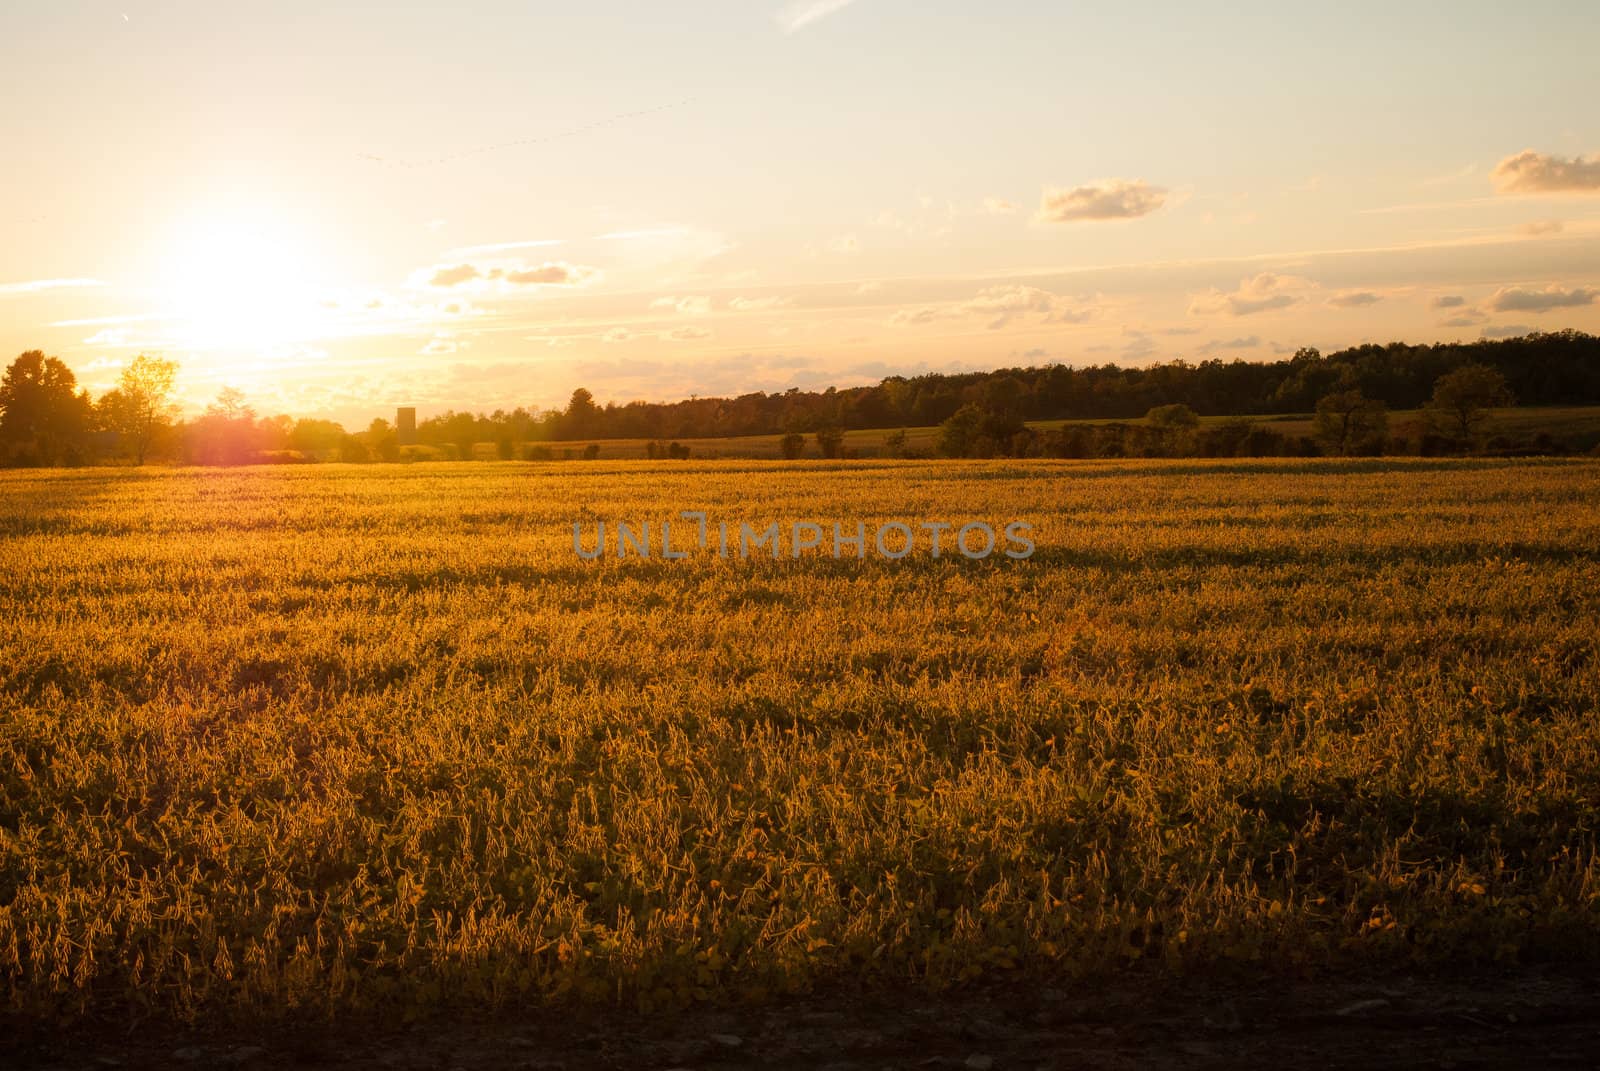 Evening Light of an Agricultural field. by oliverjw